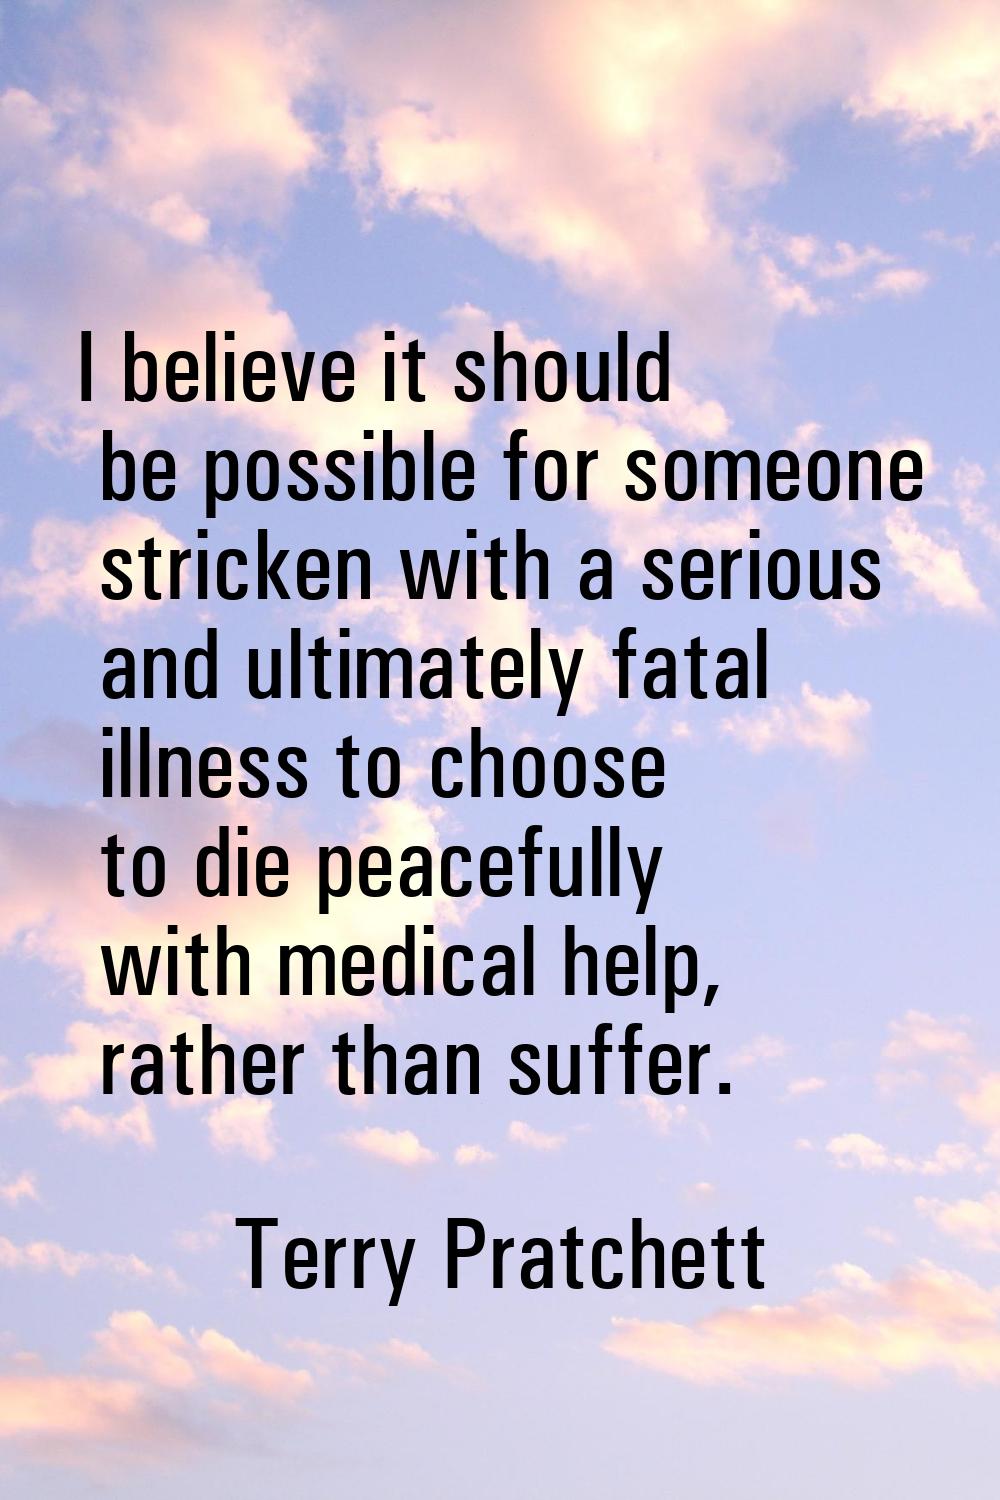 I believe it should be possible for someone stricken with a serious and ultimately fatal illness to